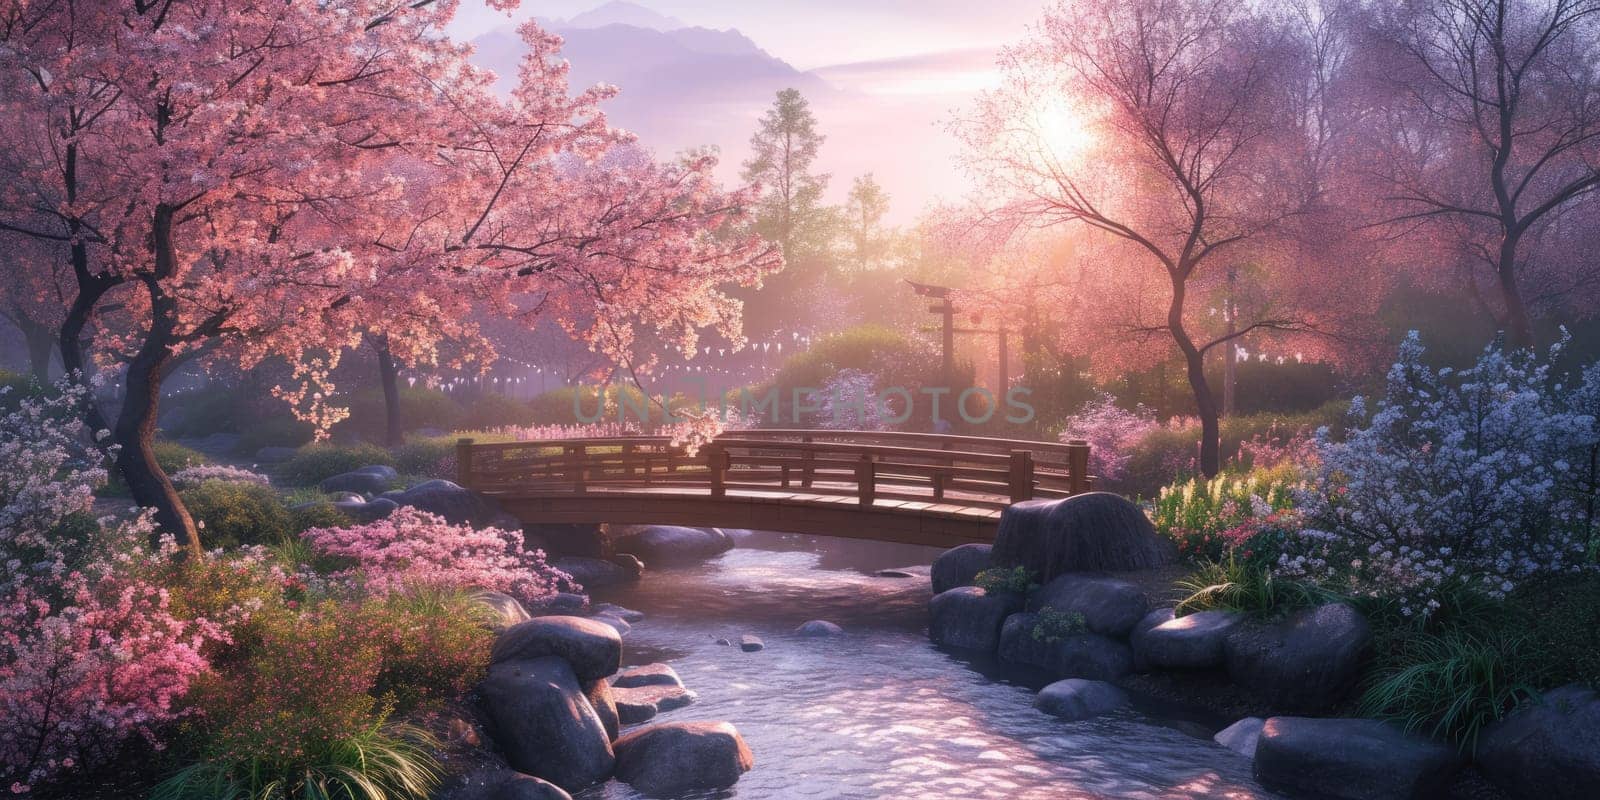 A serene Zen garden at sunrise, with a gently flowing stream. Resplendent. by biancoblue